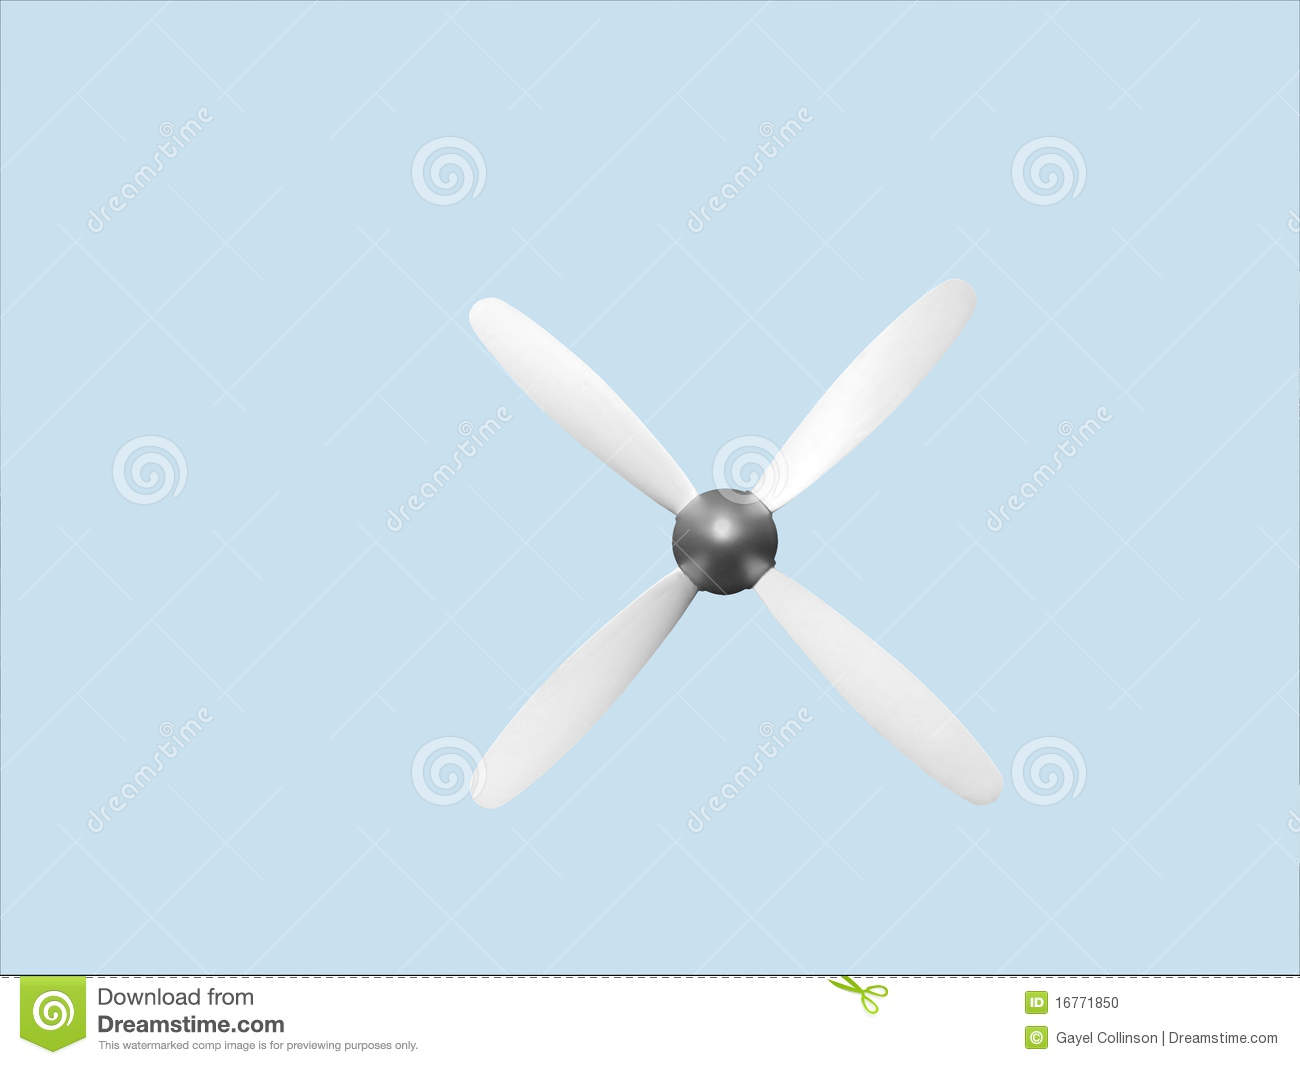 Four Bladed Aircraft Propeller Isolated On Light Blue Background With